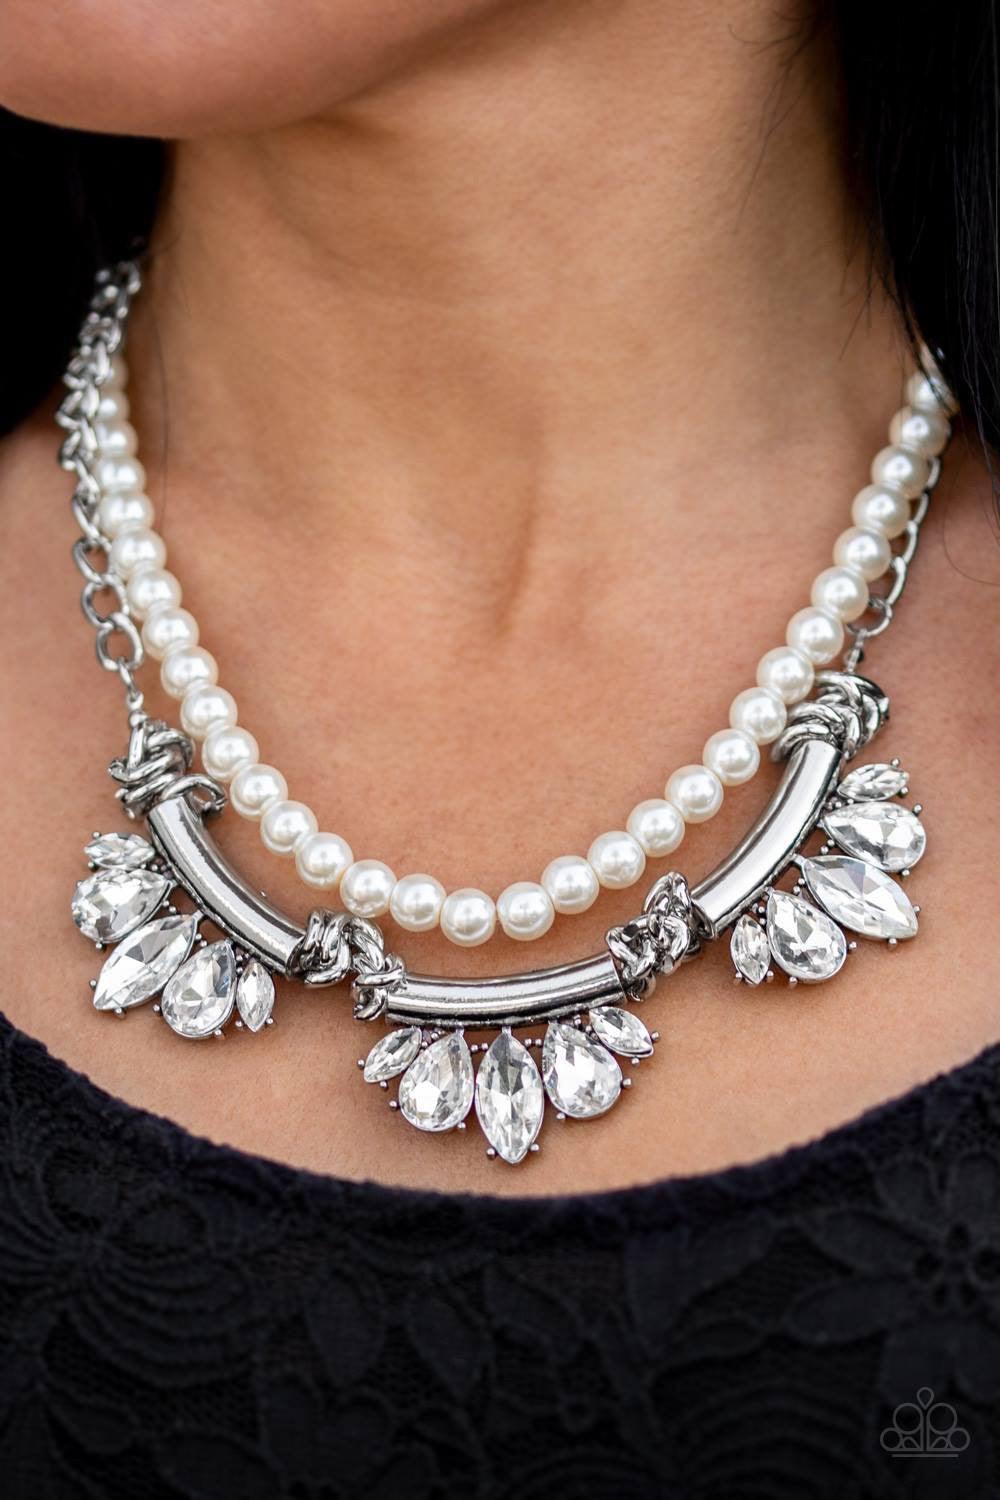 Paparazzi Accessories Bow Before The Queen - White A classic strand of white pearls and dramatic silvery chain drape below the collar. Infused with heavy metal accents, teardrop and marquise cut white rhinestone frames connect into a show-stopping fringe.